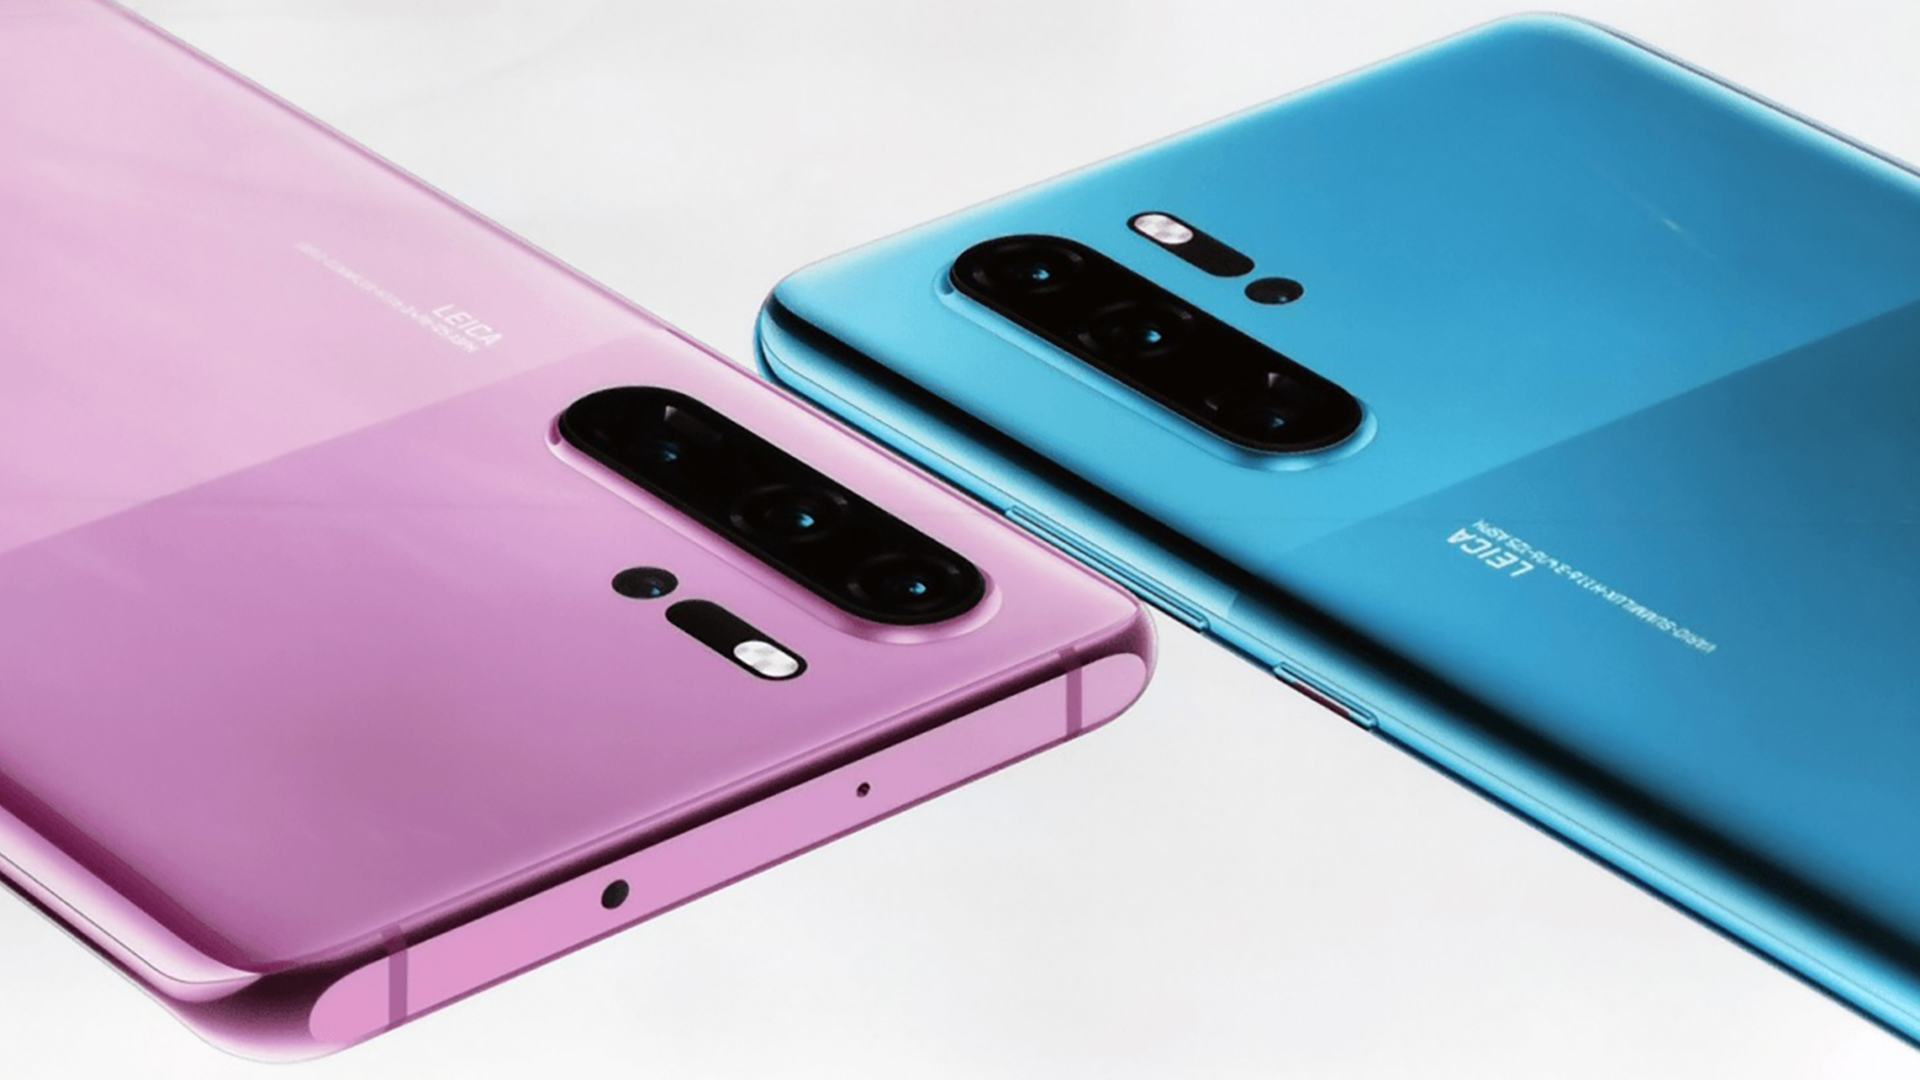 HUAWEI P30 Pro New 2019 Colors, including Misty Lavender and Mystic Blue.